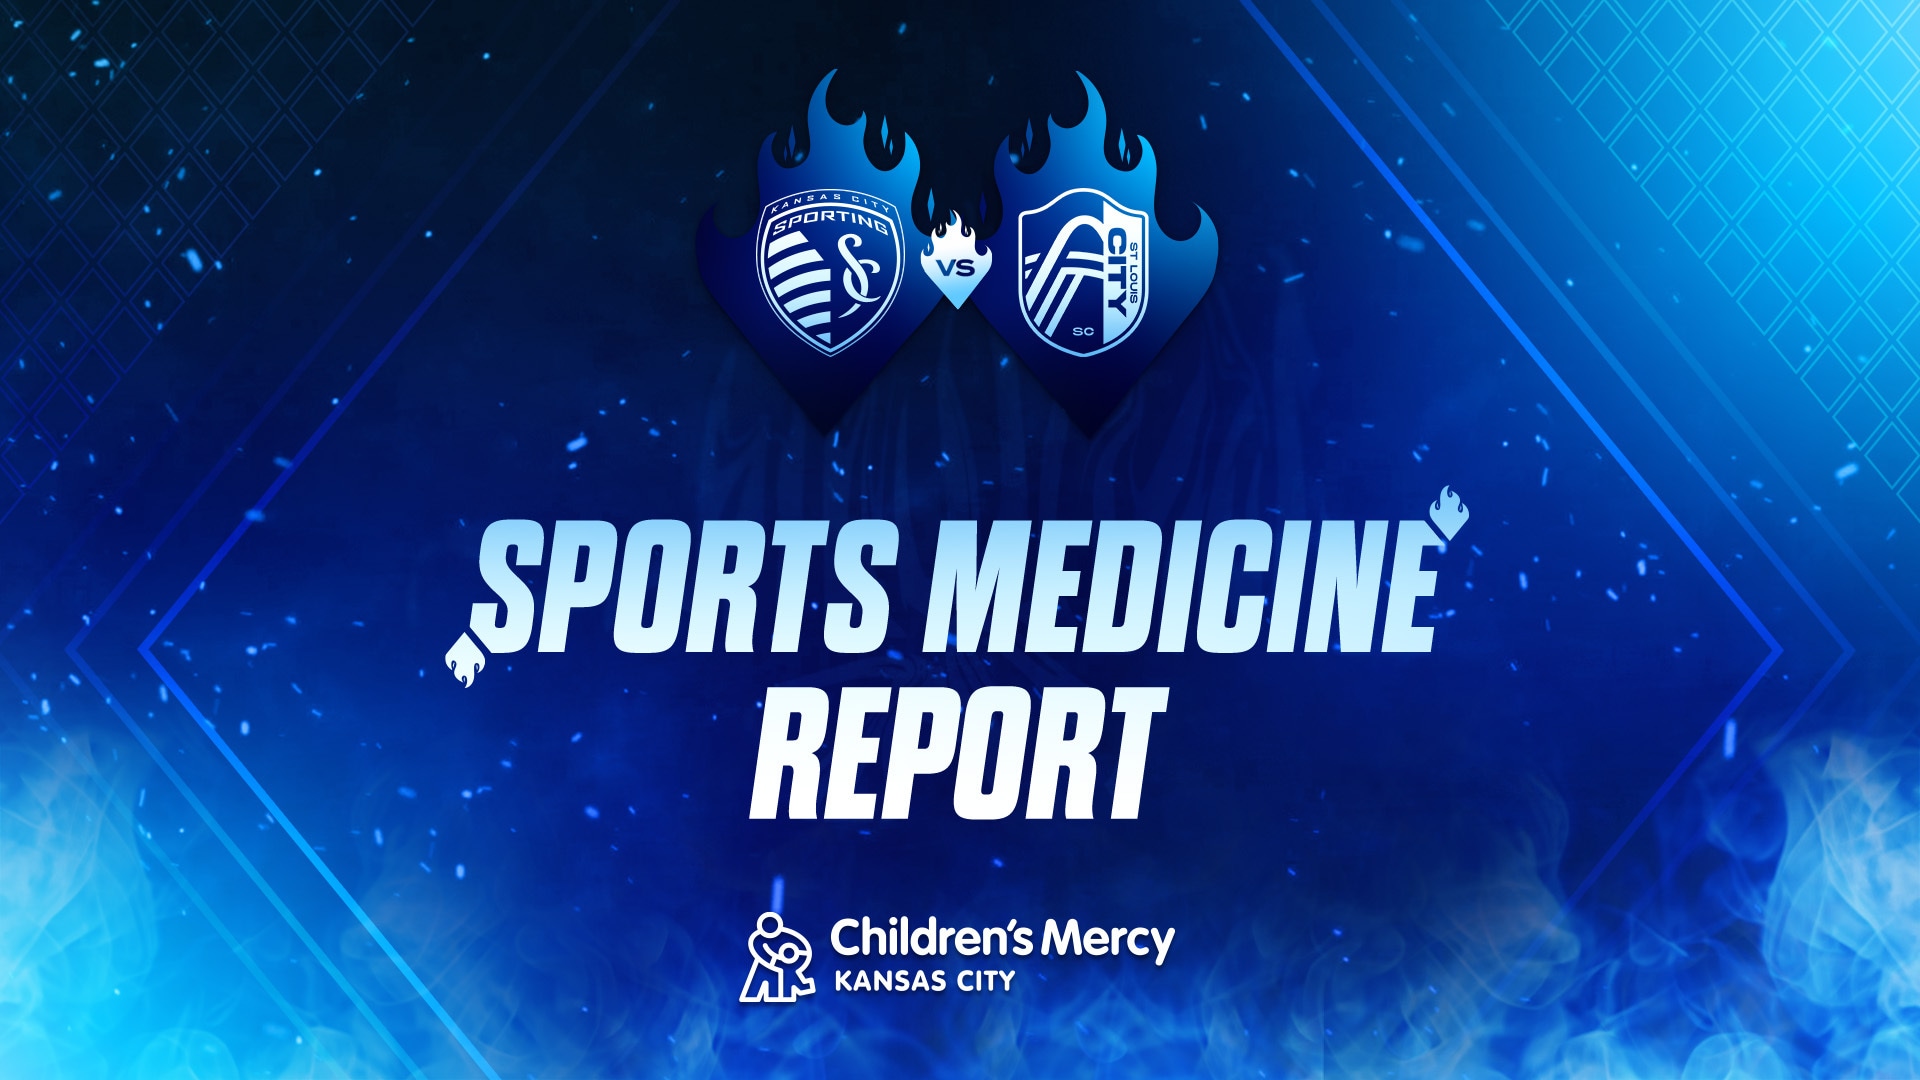 Headlining Match: Sporting Kansas City vs. St. Louis – A Rivalry Revived with Injury Concerns